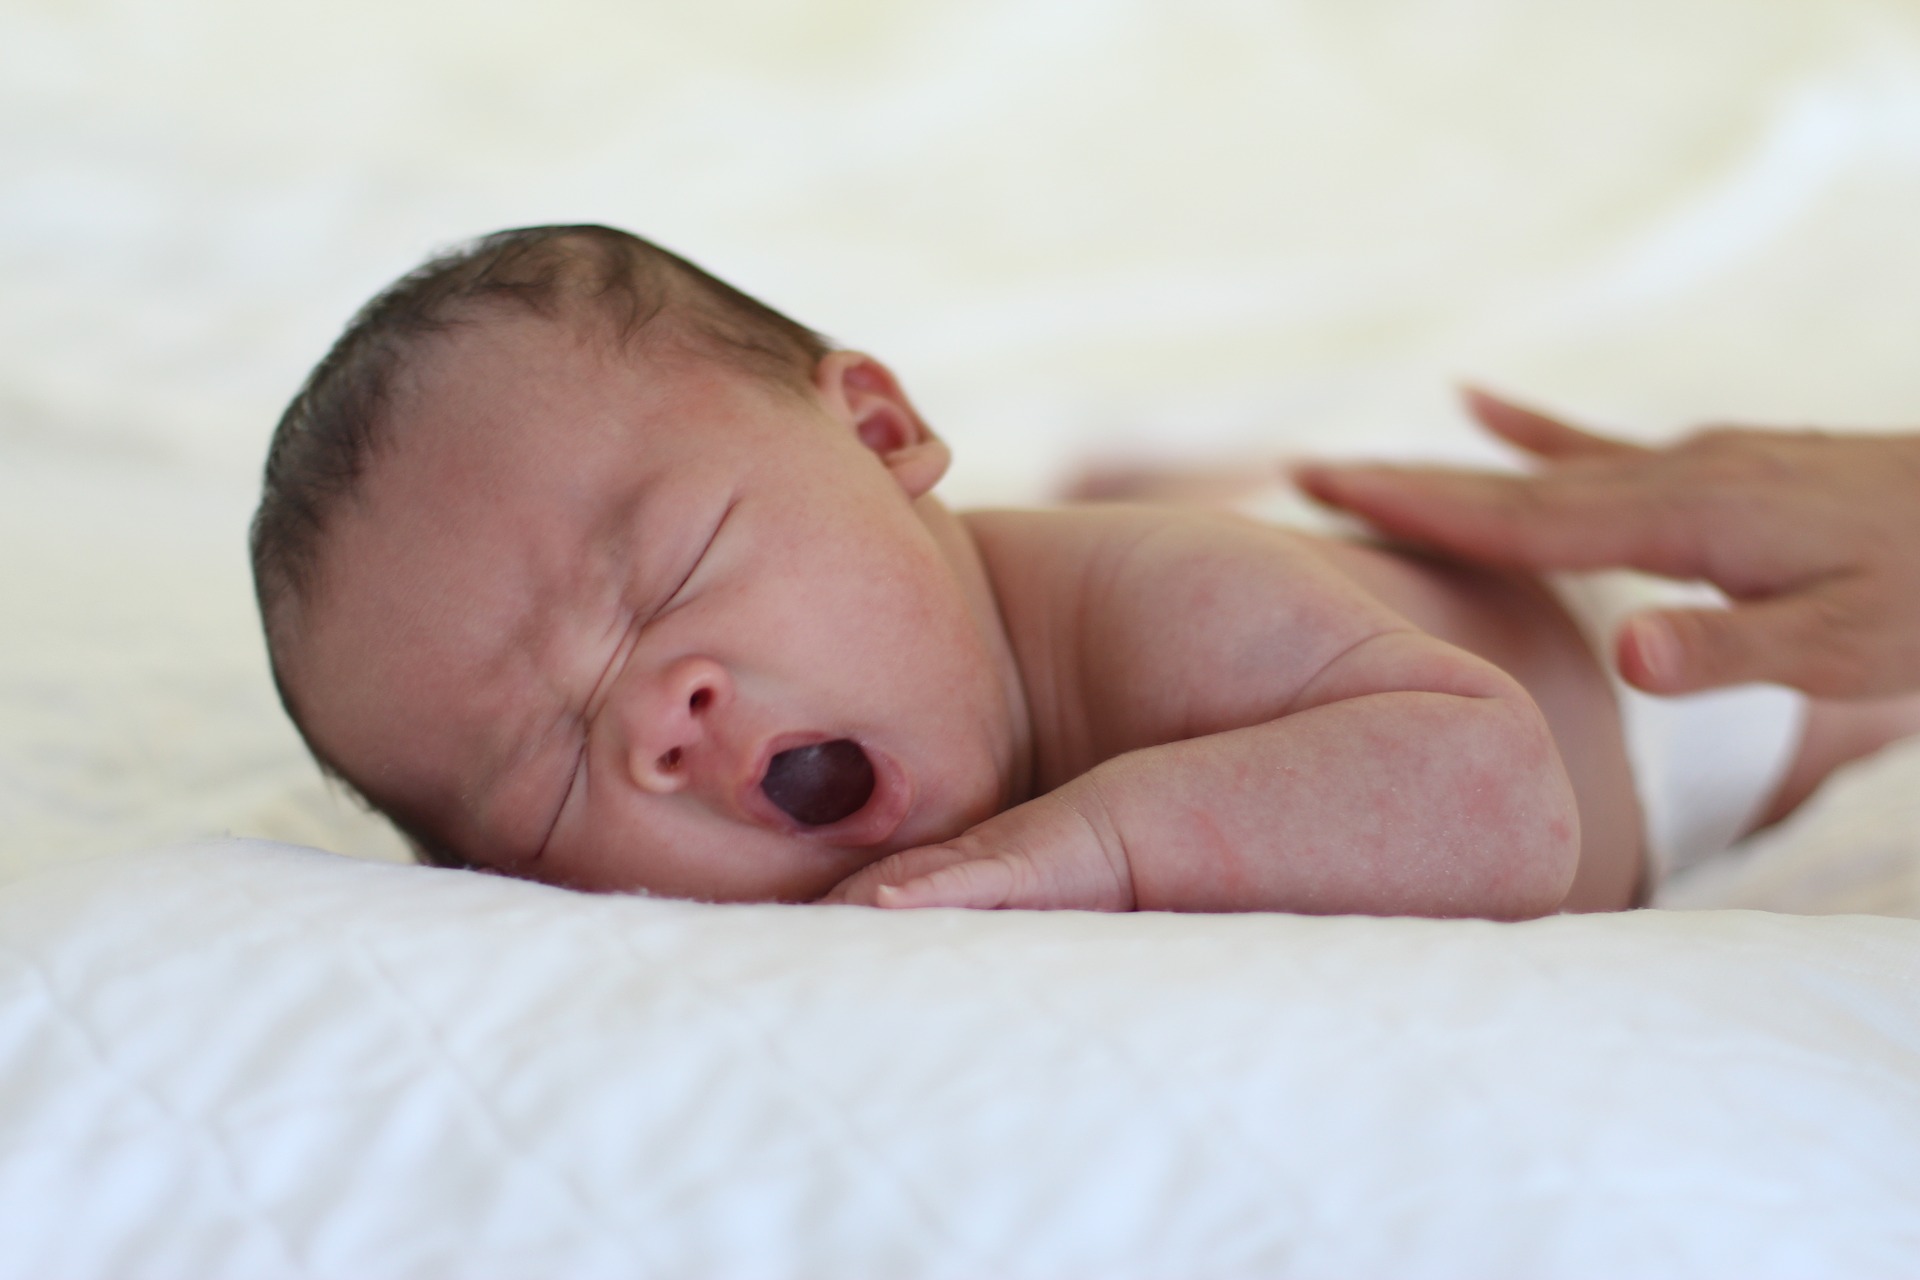 sleepy baby yawning - possible cause of low milk flow